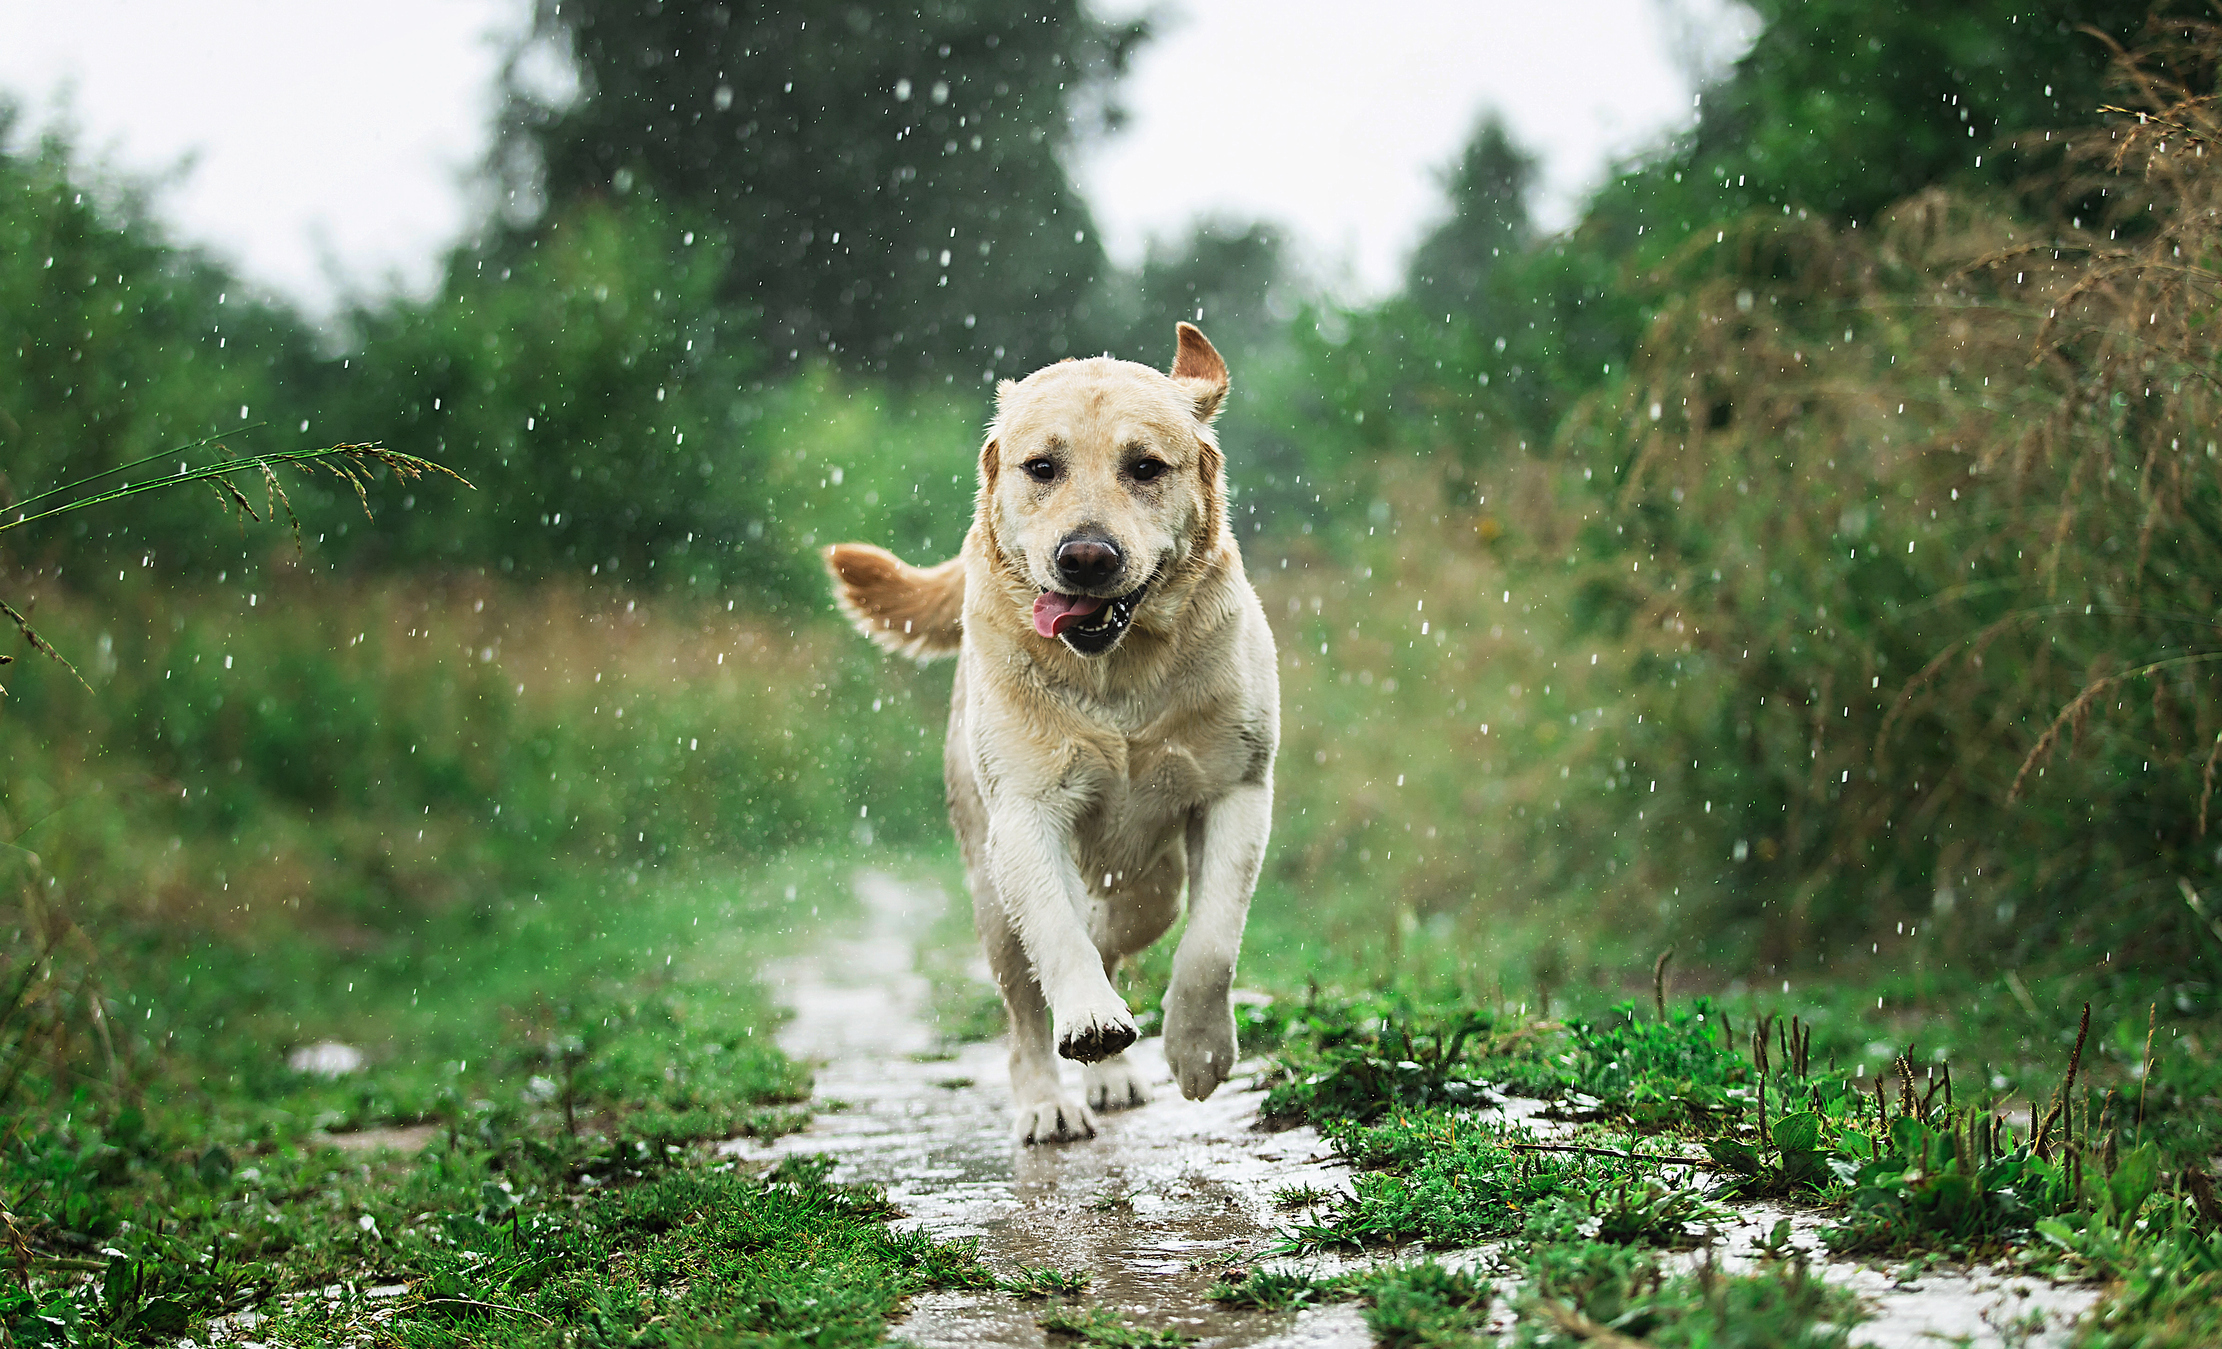 Labrador Retriever running through a rain puddle is at increased risk for a summer ear infection